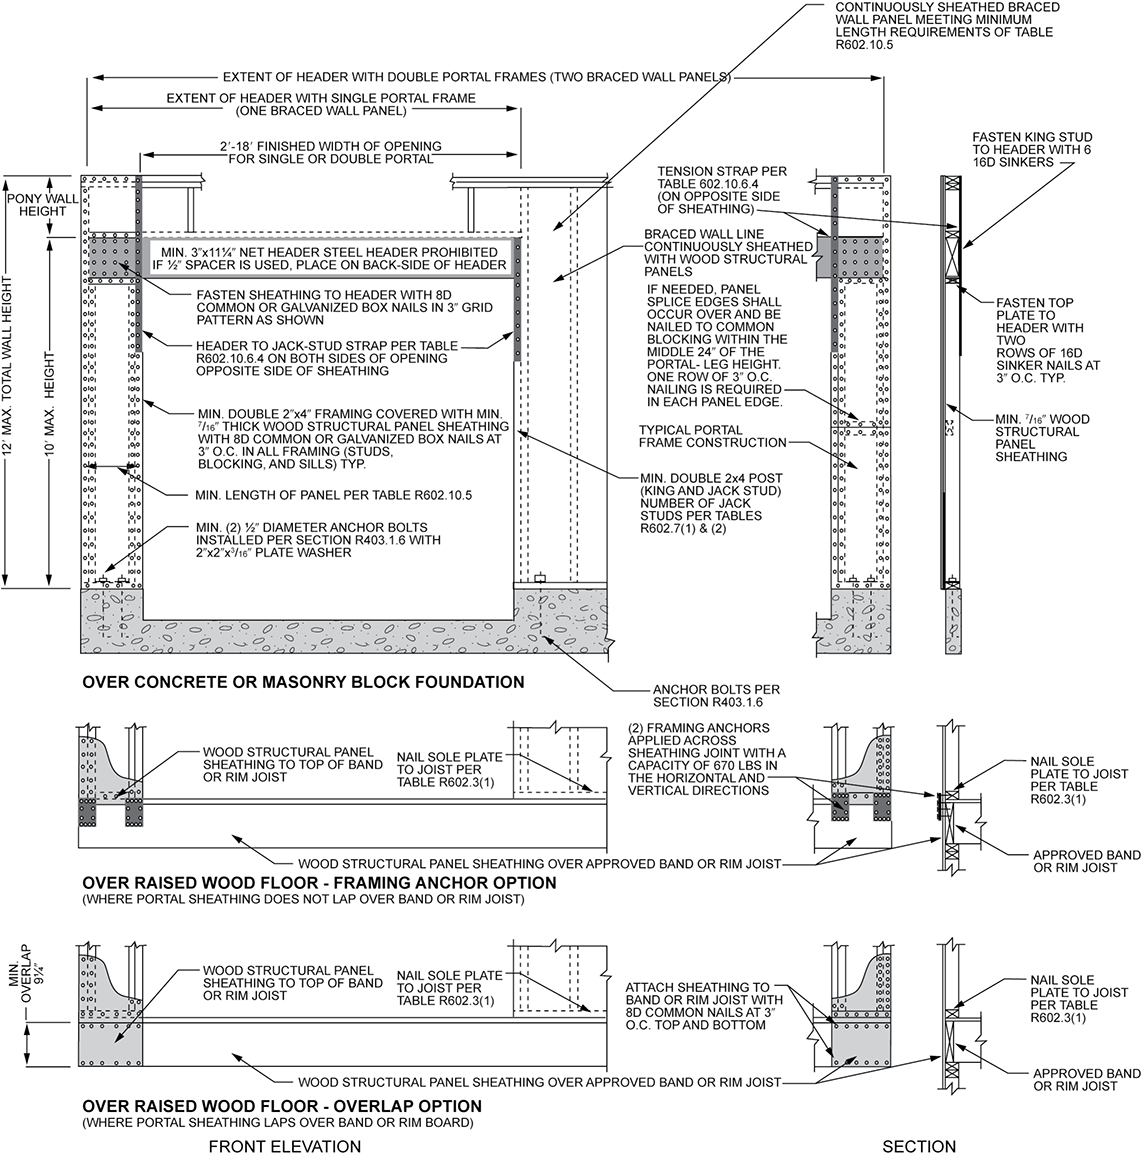 Framing and Building Walls, Rough Openings and Headers